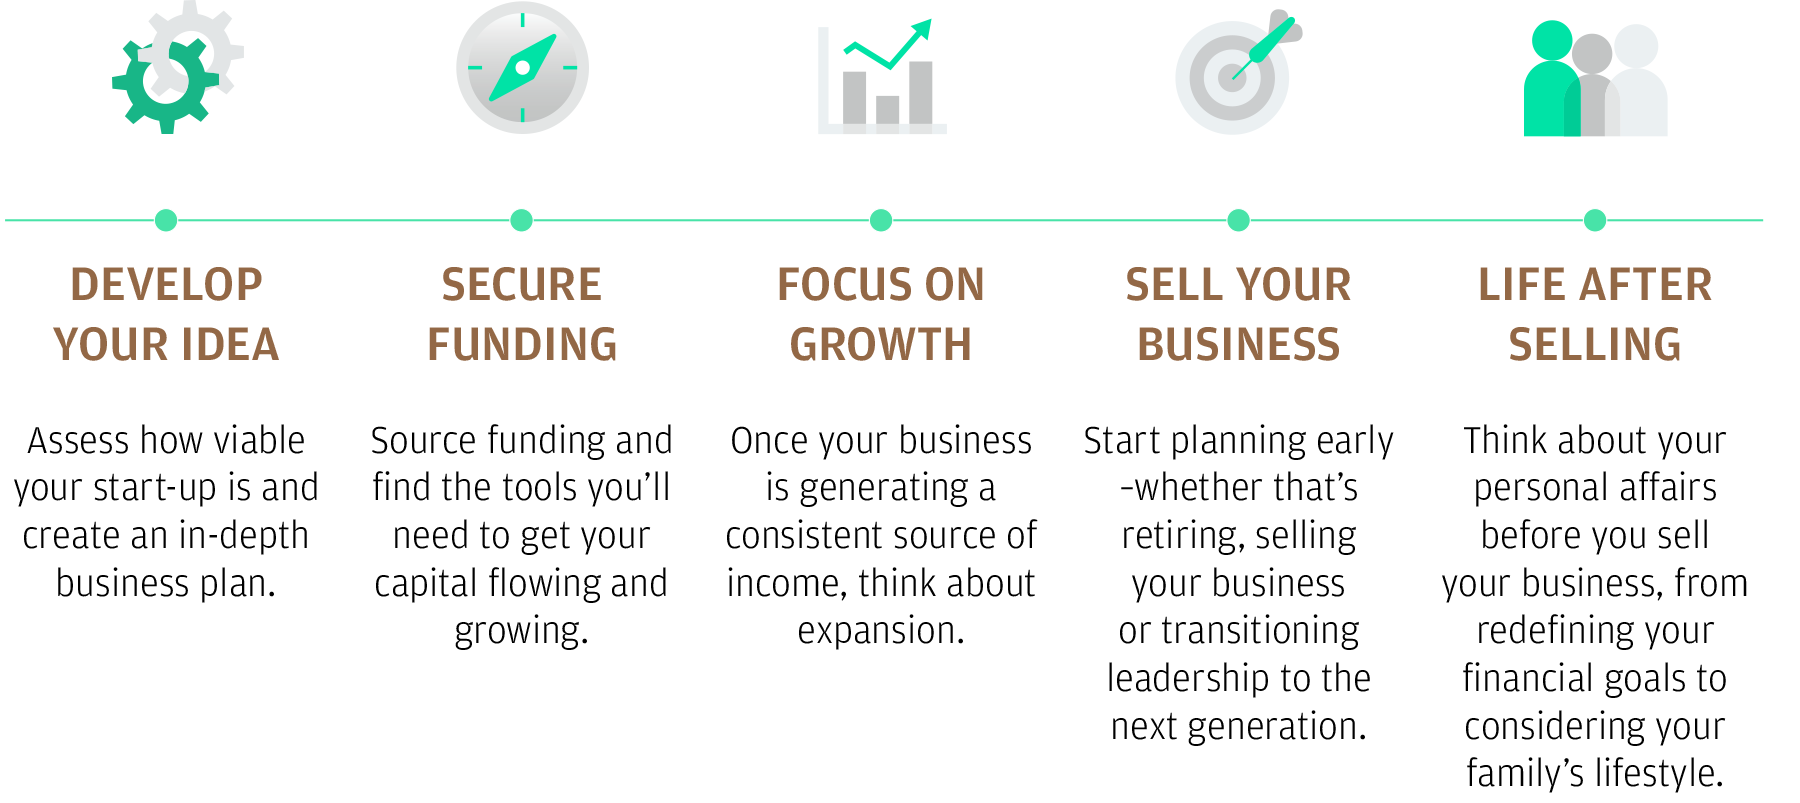 The lifecycle of a typical tech entrepreneur and what they should expect as they move through each stage of it.